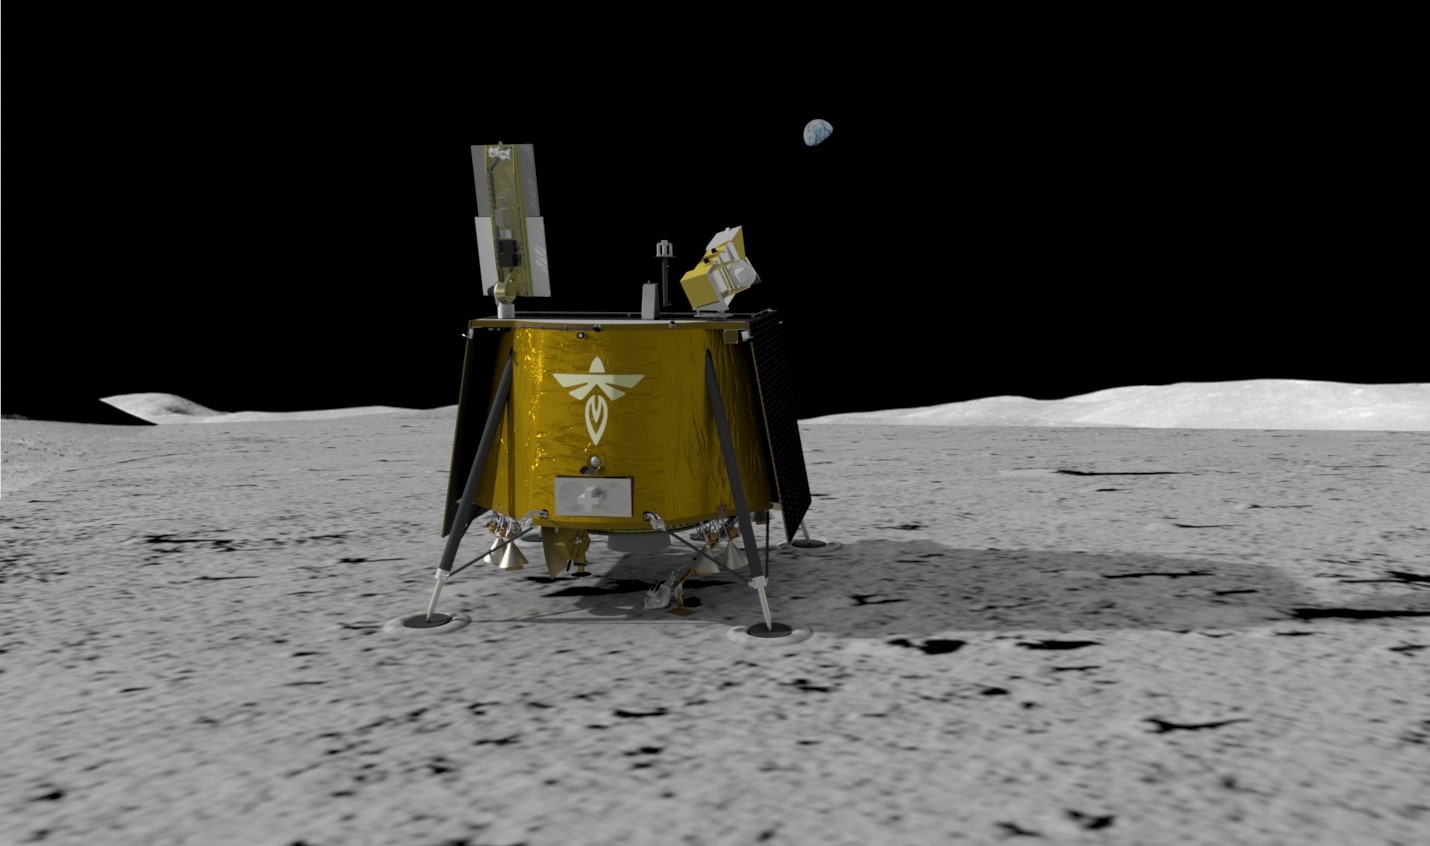 a squat, roughly cube-shaped spacecraft wrapped in gold foil sits on the surface of the moon